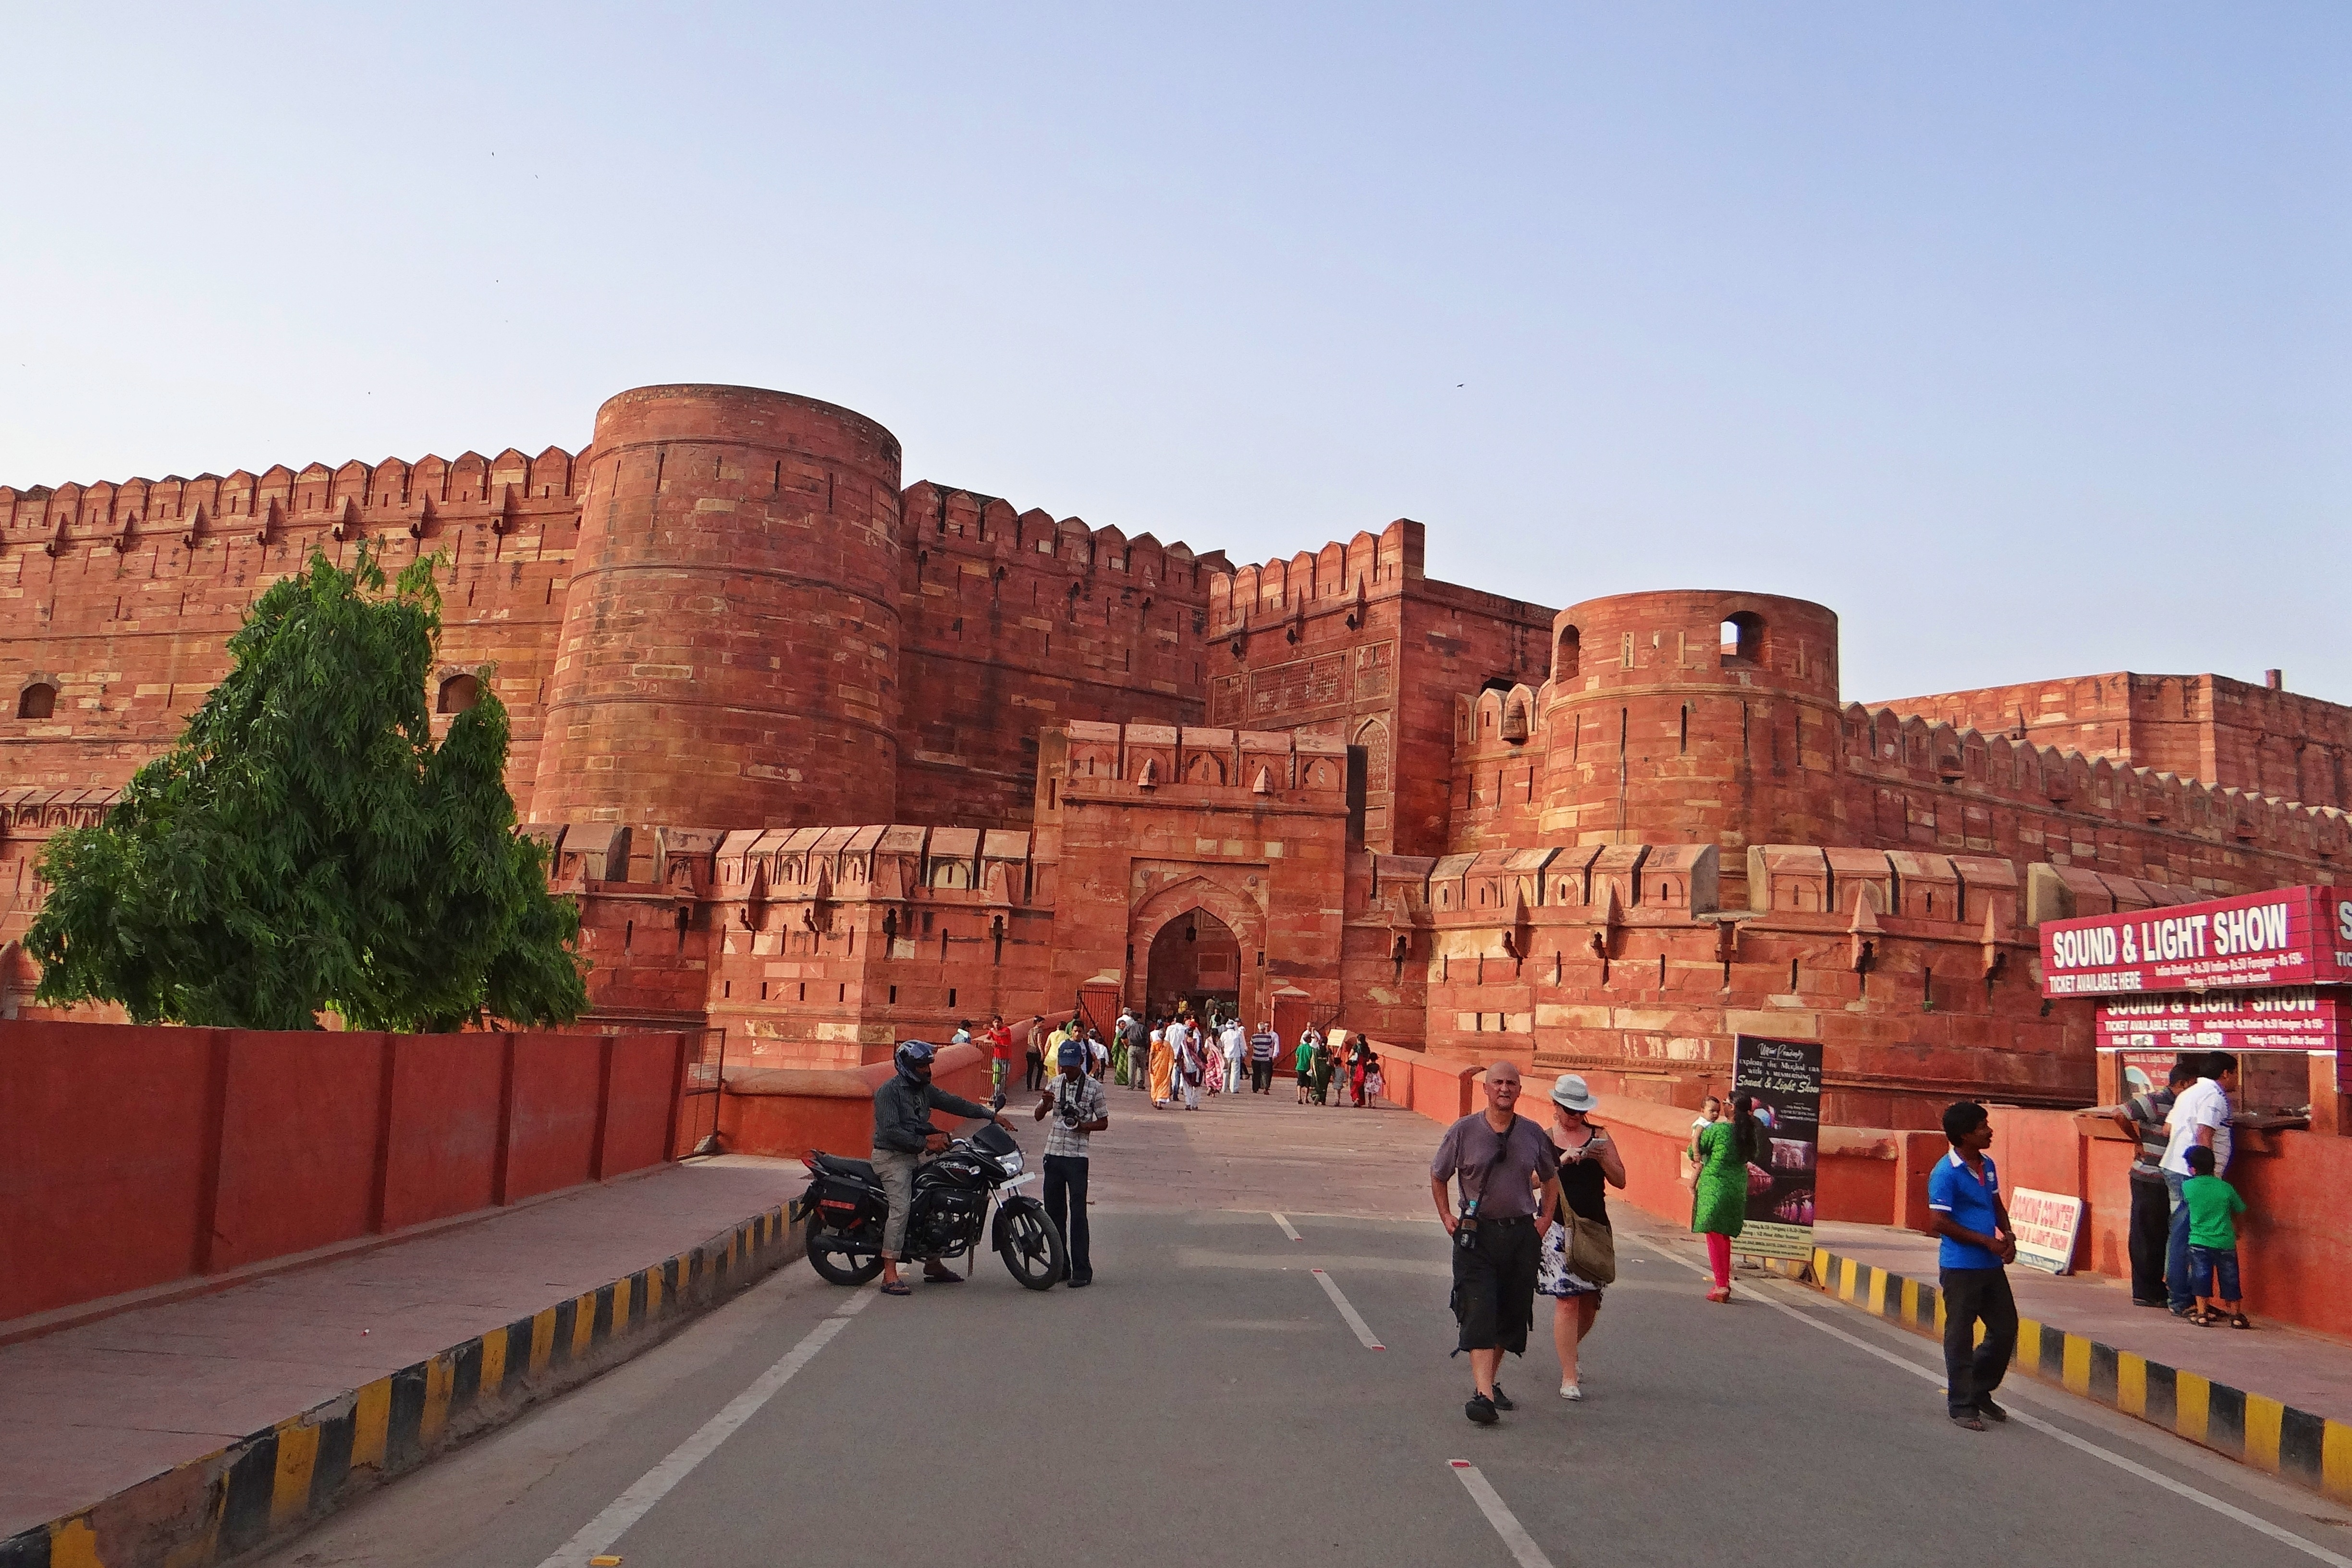 Rajasthan Fort, Palaces, Desert and Village Tour